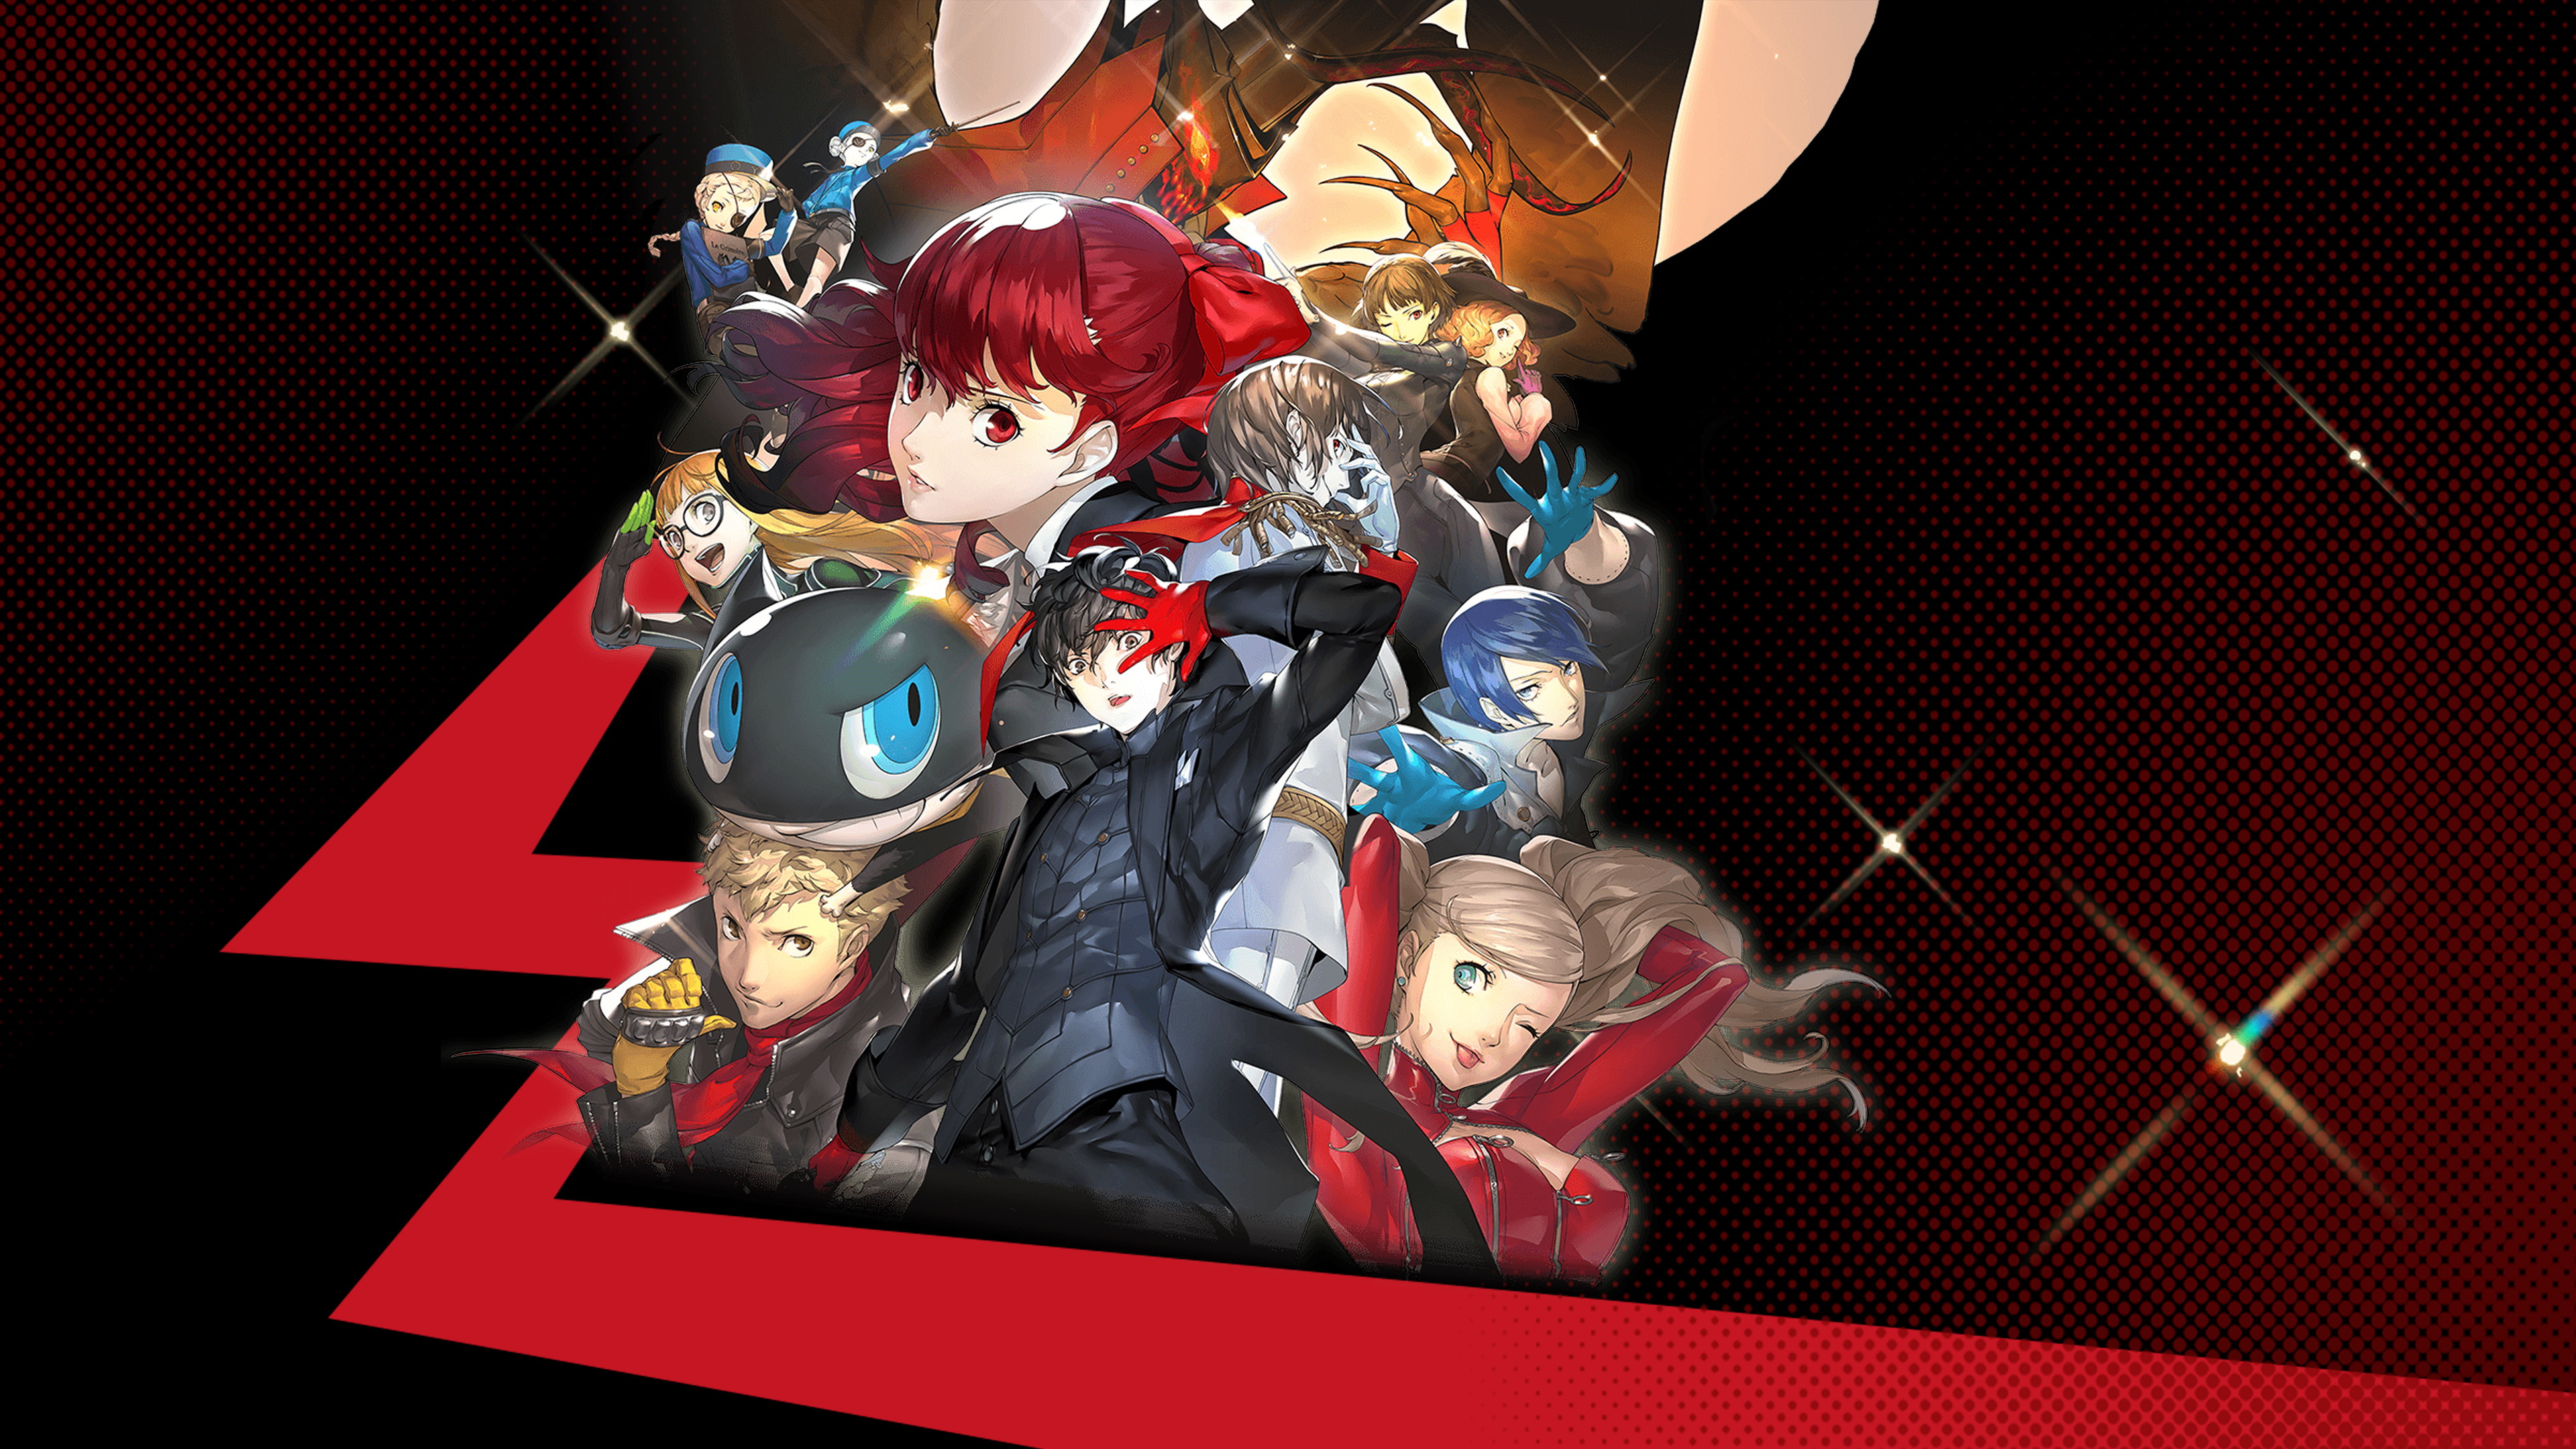 Persona 5 Royal Details Launchbox Games Database free images, download Pers...